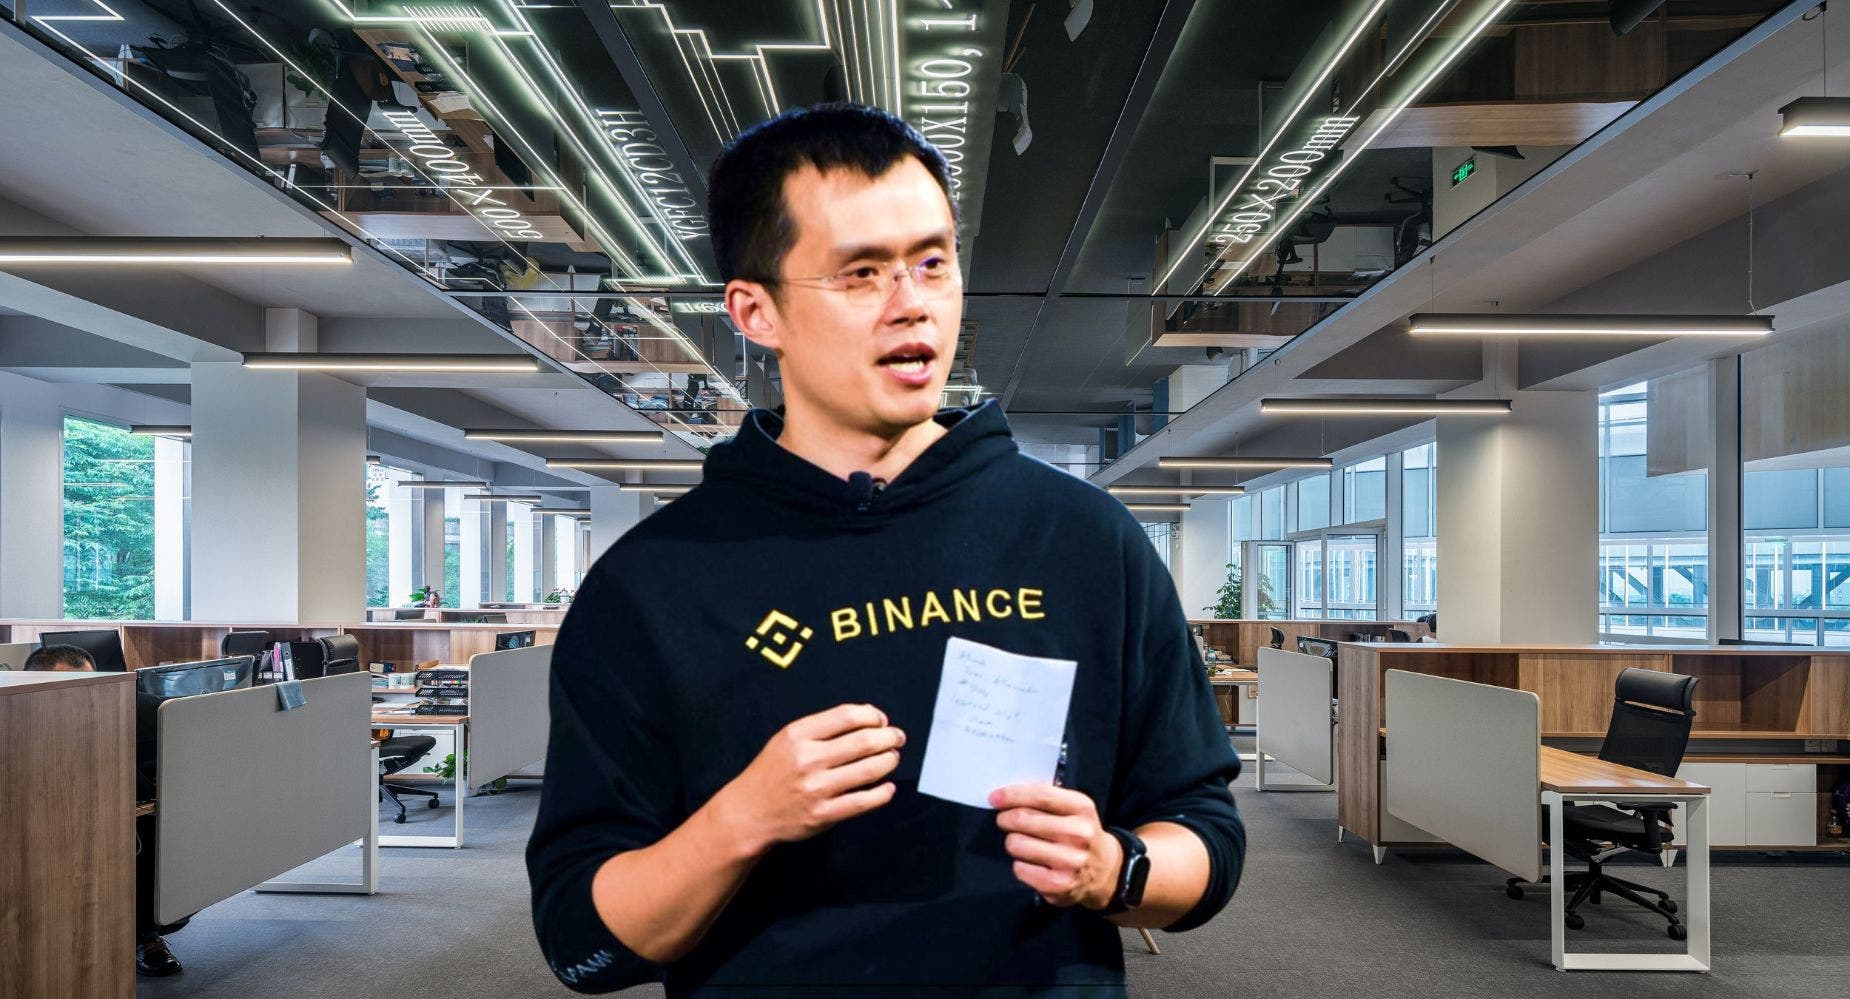 Binance Launches Global Law Enforcement Training Program: 'We Are Seeing An Increased Demand For Training'